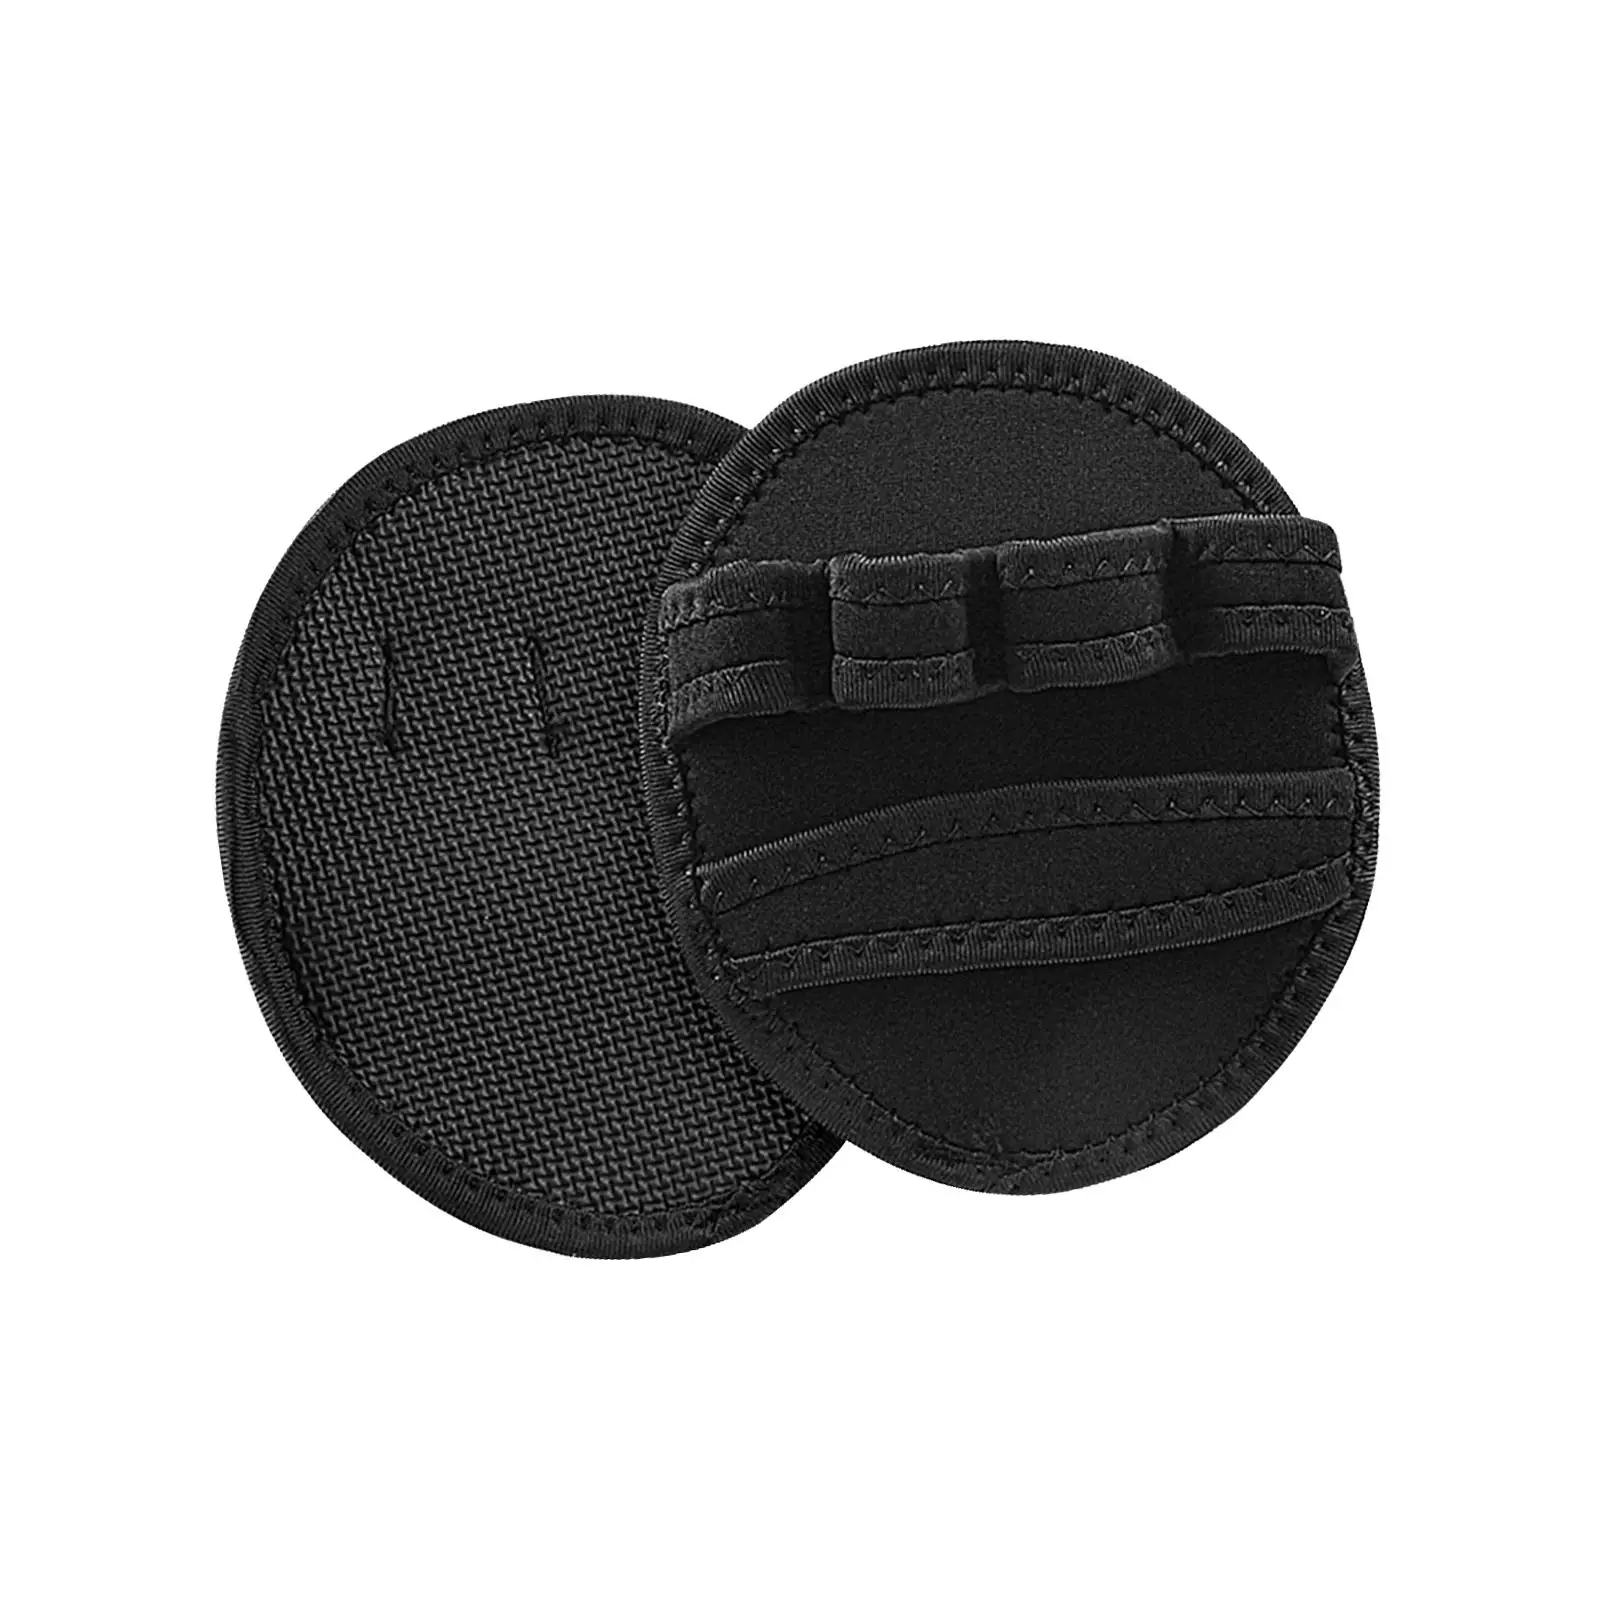 Weight Lifting Grip Pads for Men Breathable Adults Non Slip Soft Unisex Durable Lightweight Palm of Care Glove Pads for Sports